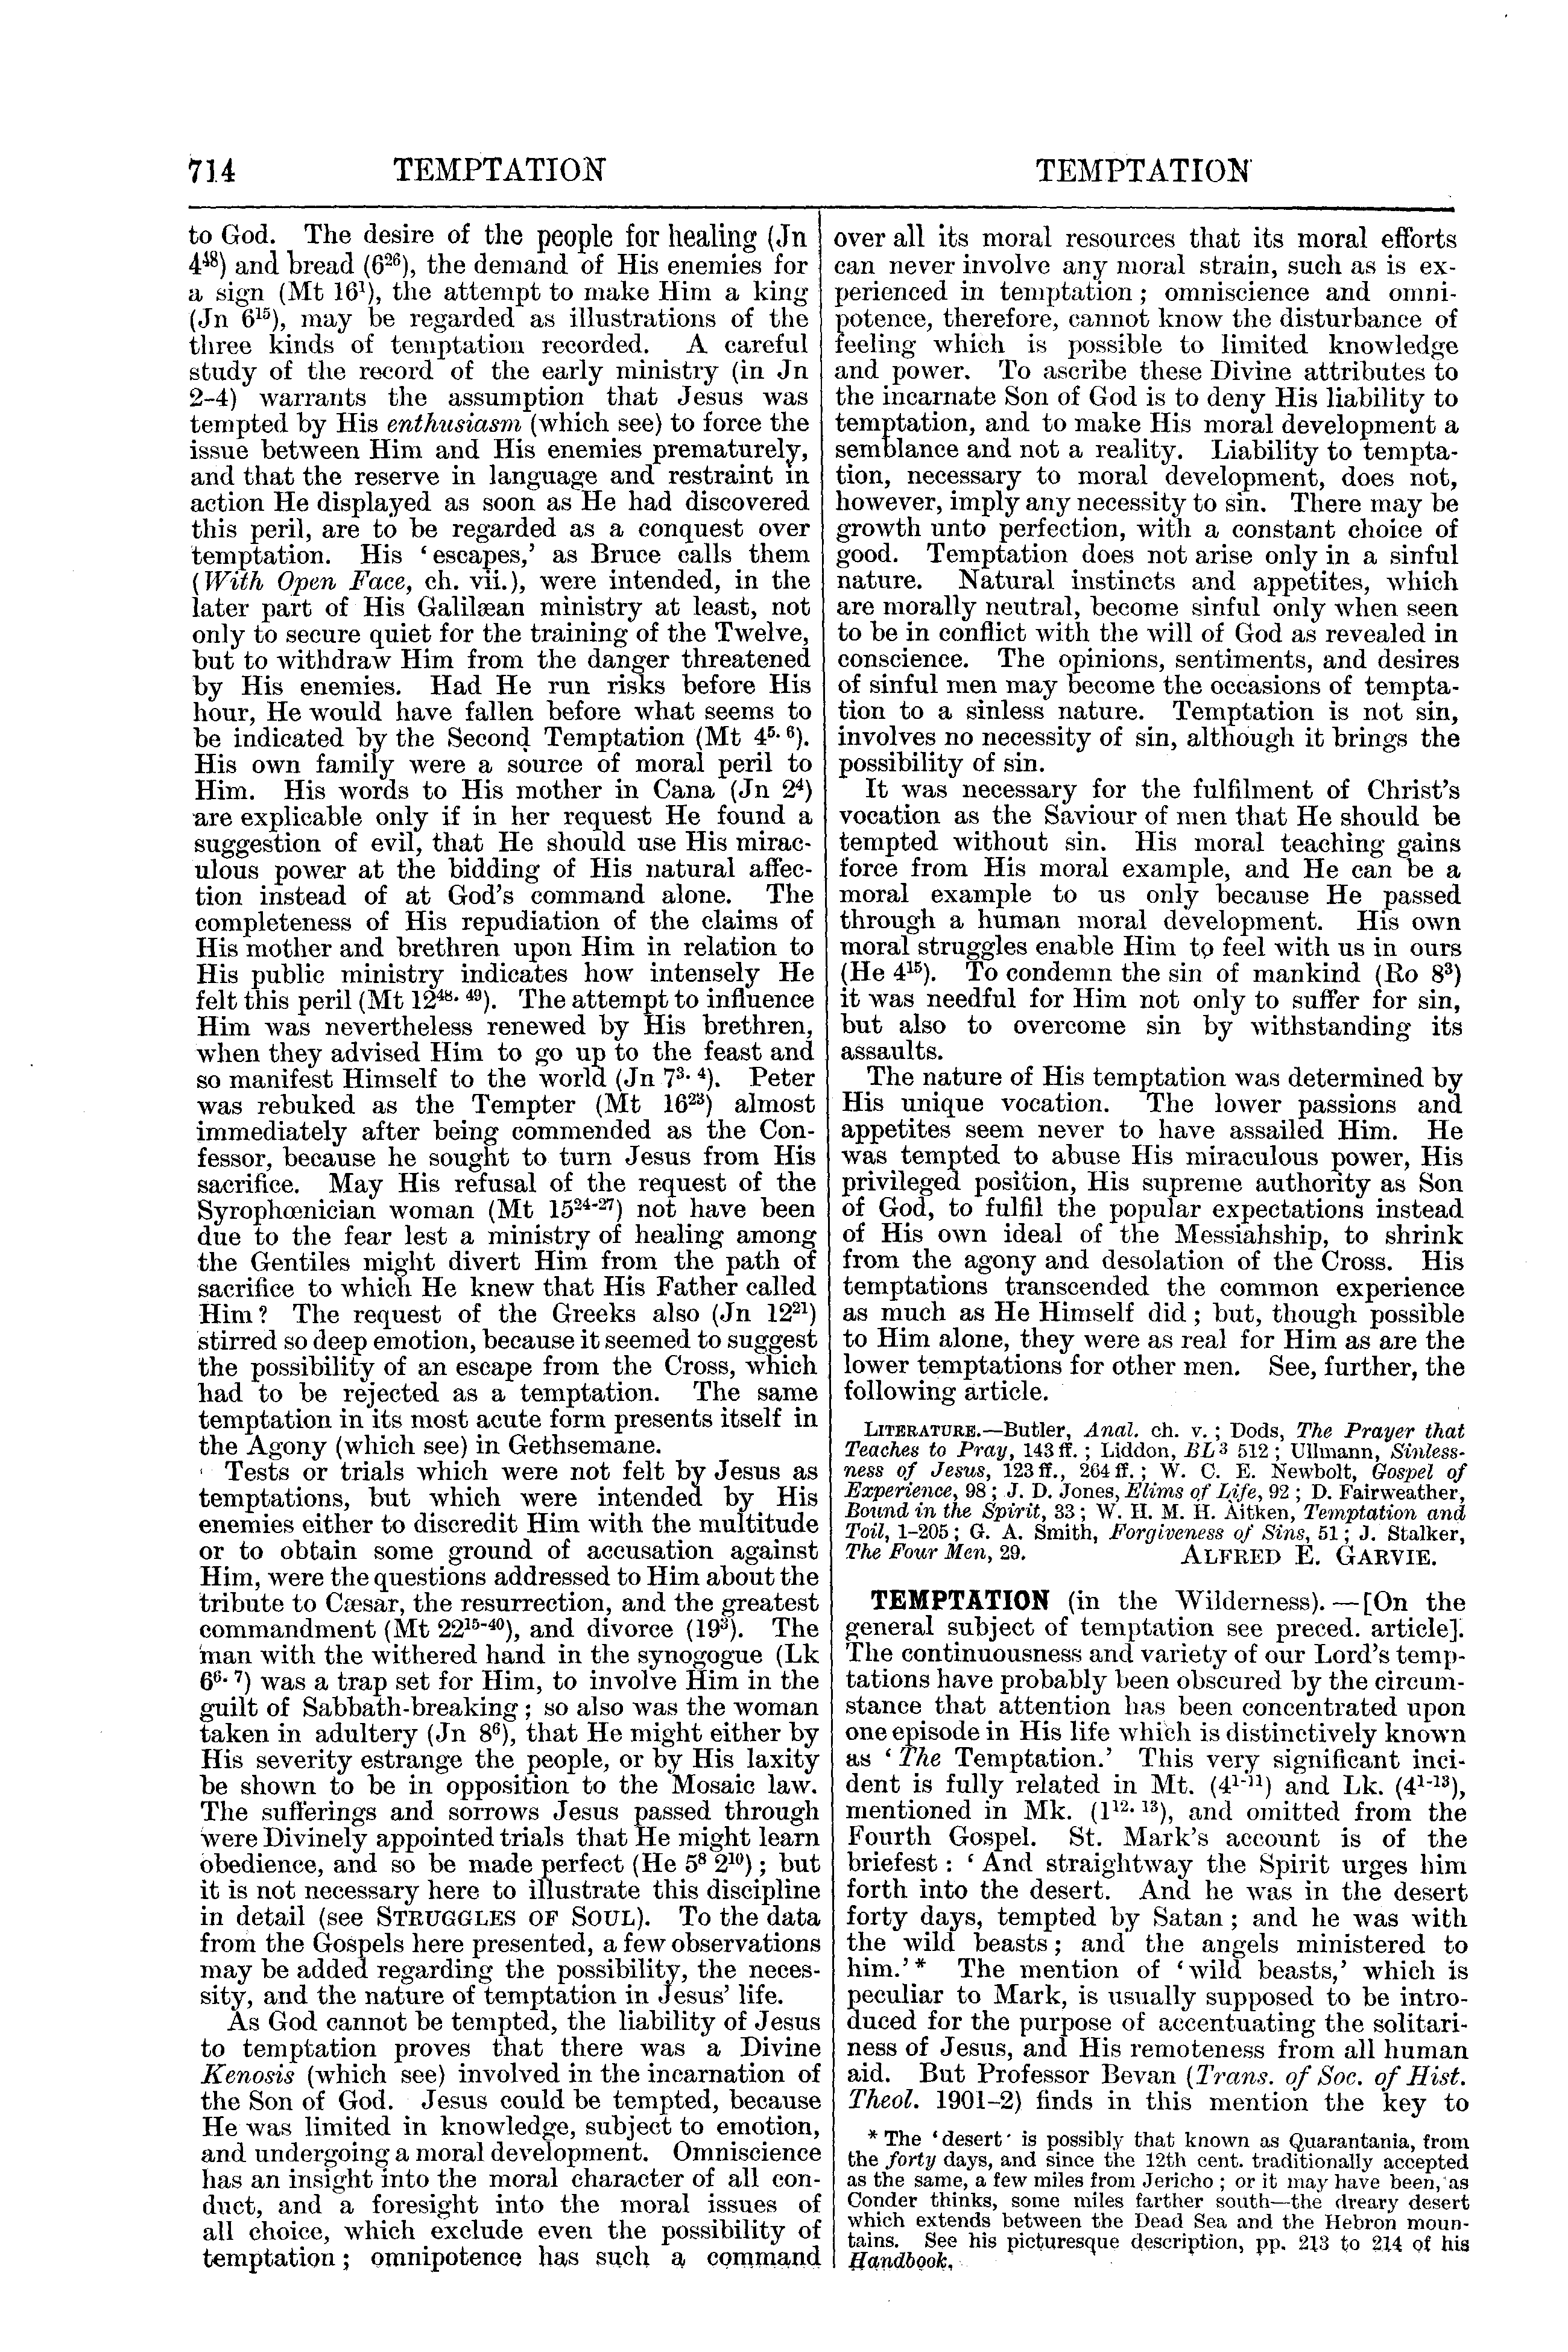 Image of page 714